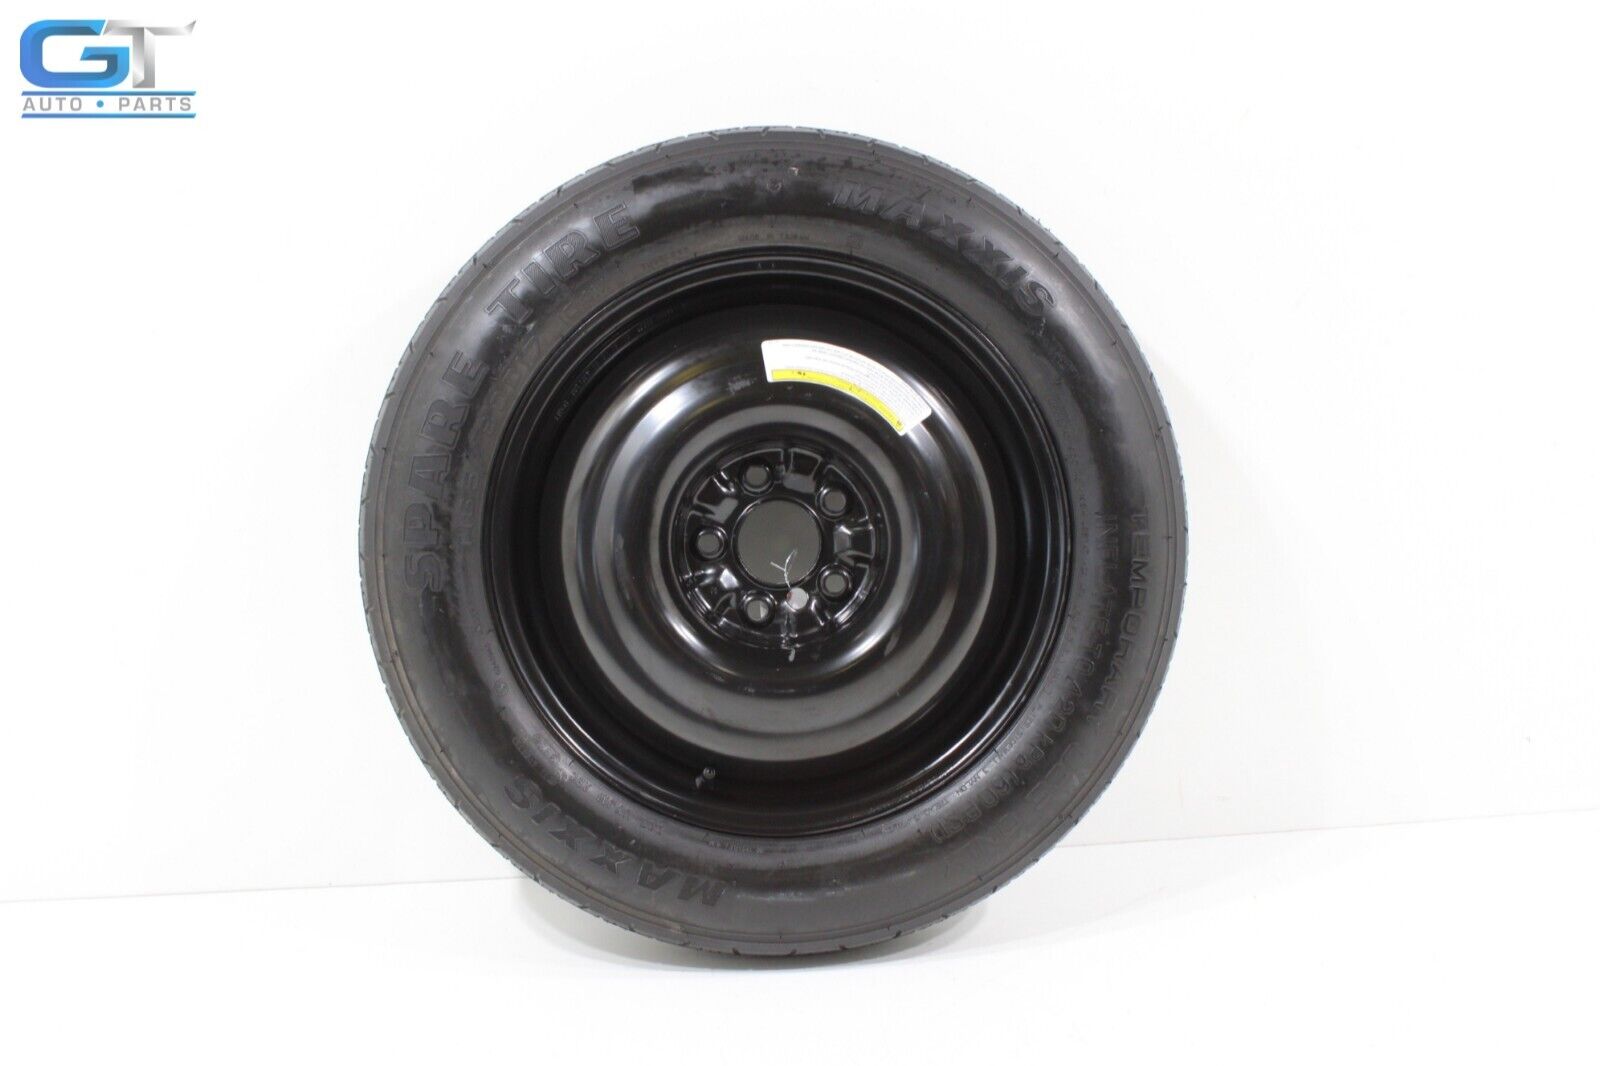 NISSAN MURANO SPARE WHEEL TIRE MAXXIS T165/80 D17 104M OEM 2016 - 2020 💠